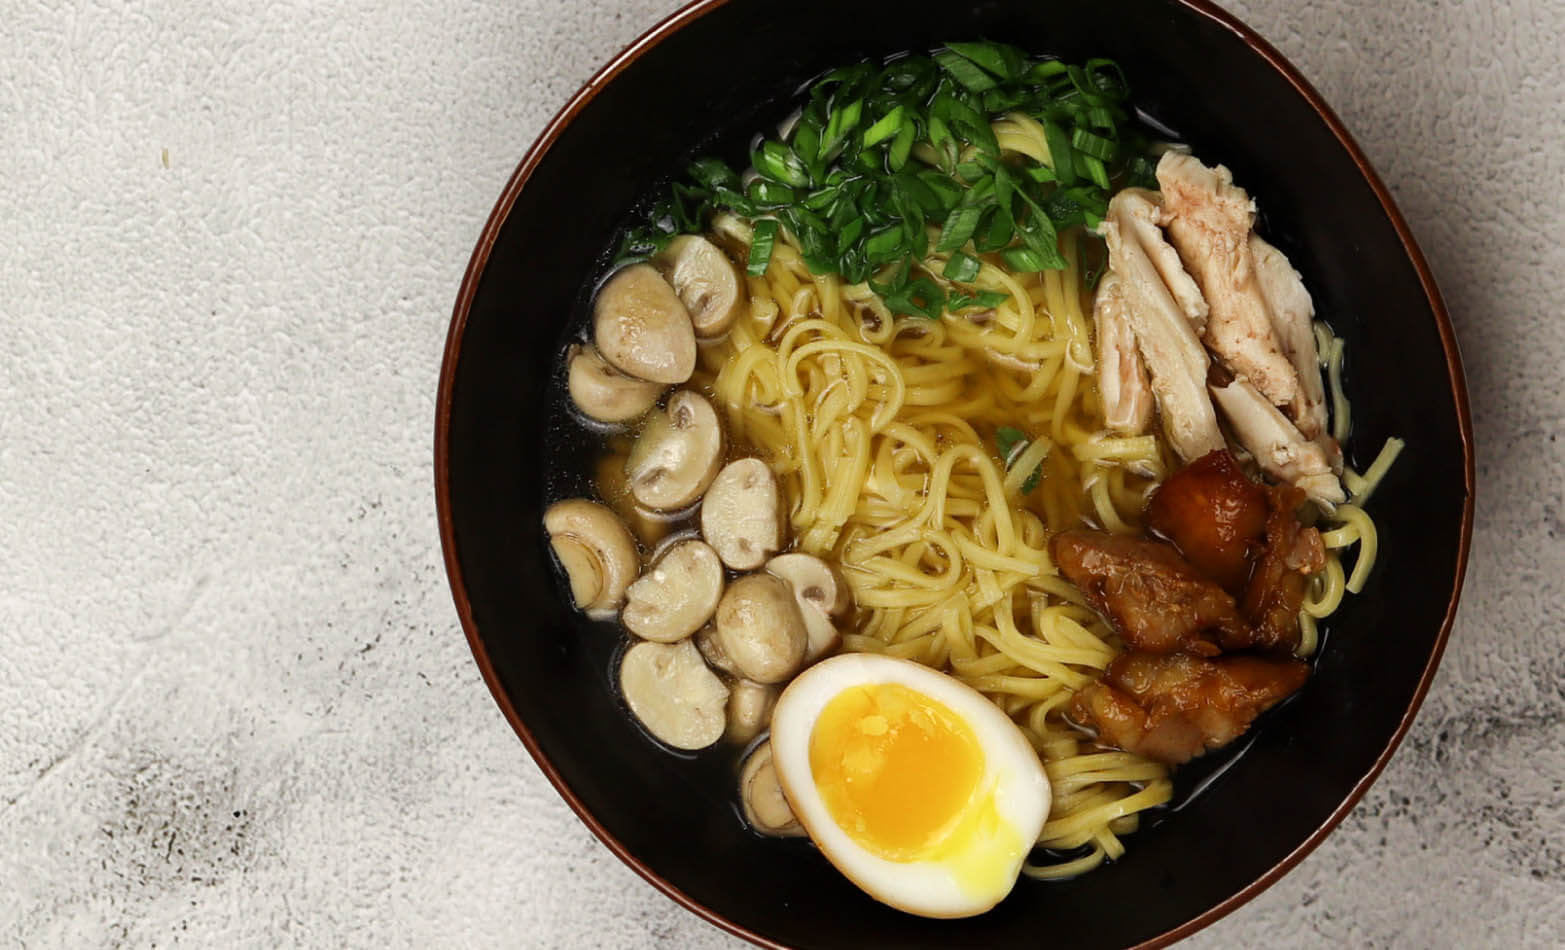 Soothing chicken ramen with egg and veggies